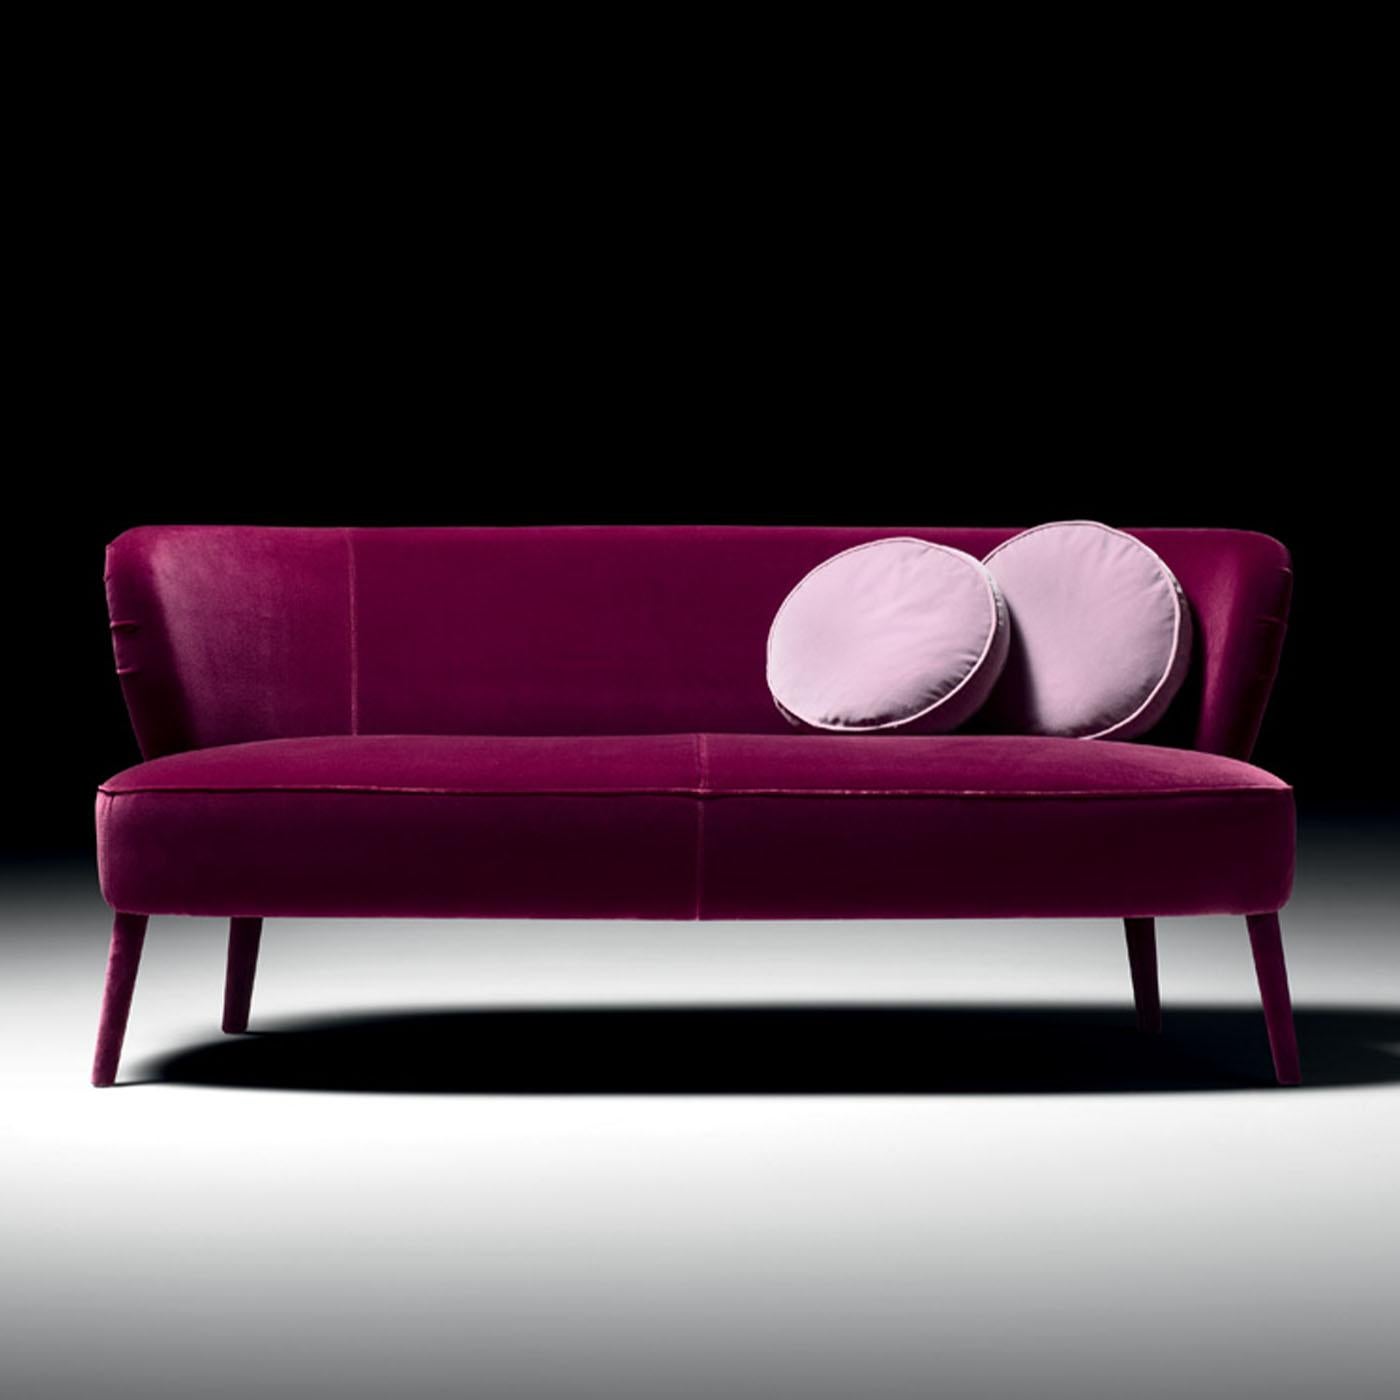 Perfect piece for adding a pop of color to otherwise dull contemporary decors, this sofa couples the sturdiness of a clean-lined beech frame with the glamour of a vibrant orchid-purple fabric upholstery. The backrest's slightly curved sides distill